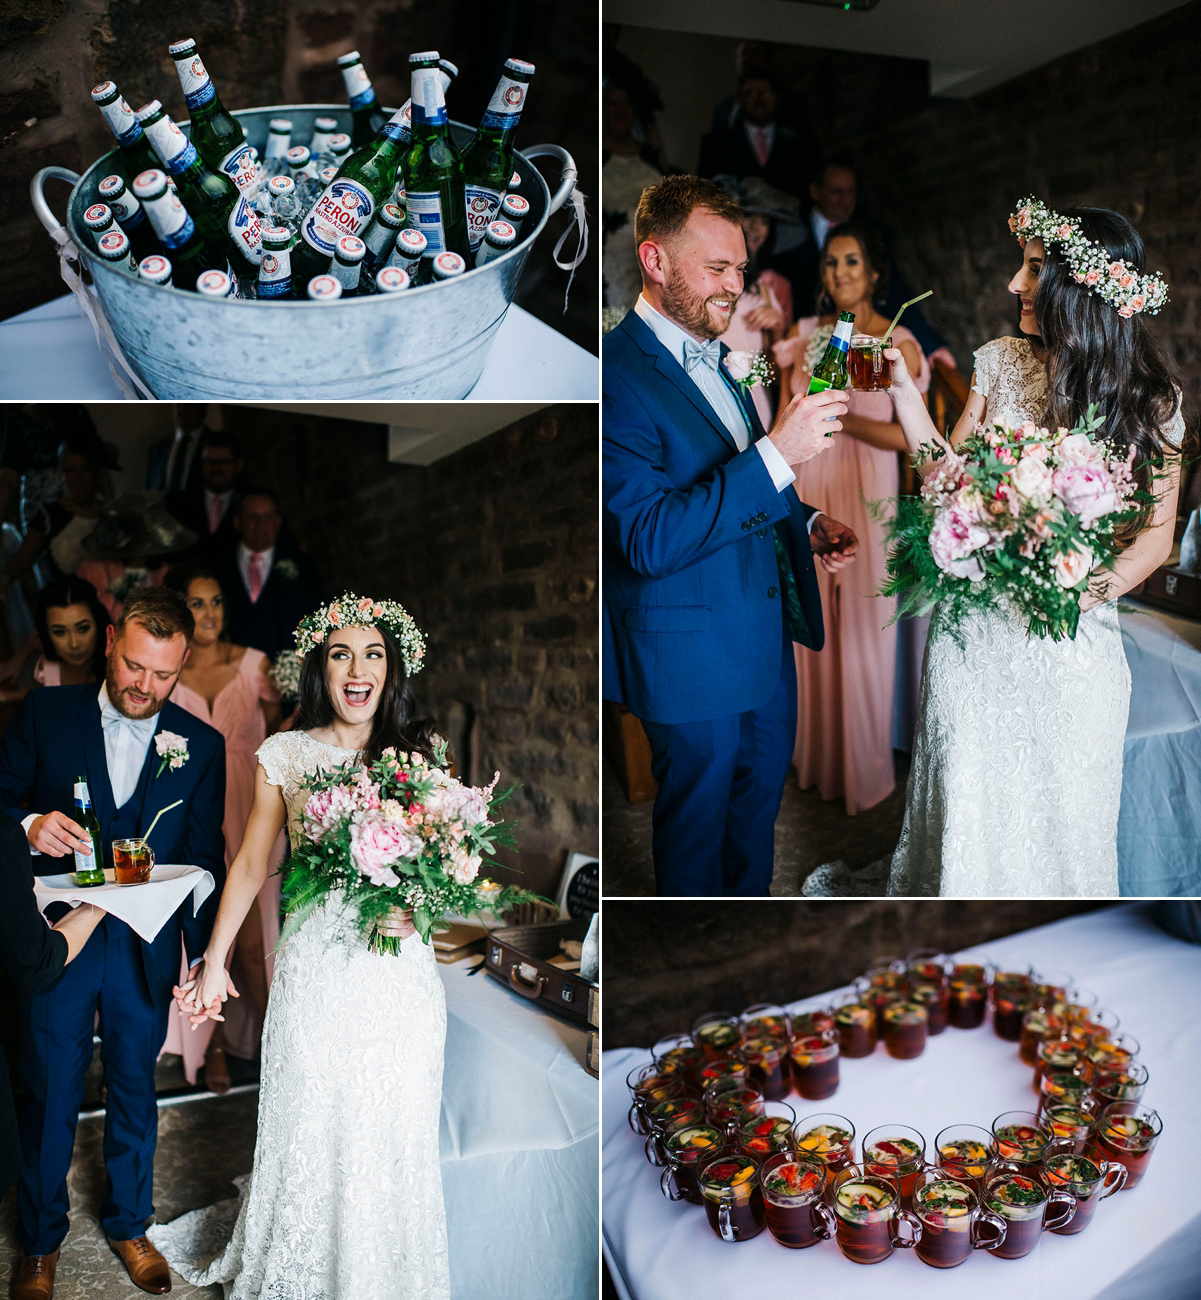 Jade wore a Sottero & Midgley gown for her boho inspired barbeque weeding. Photography by Kerry Woods.